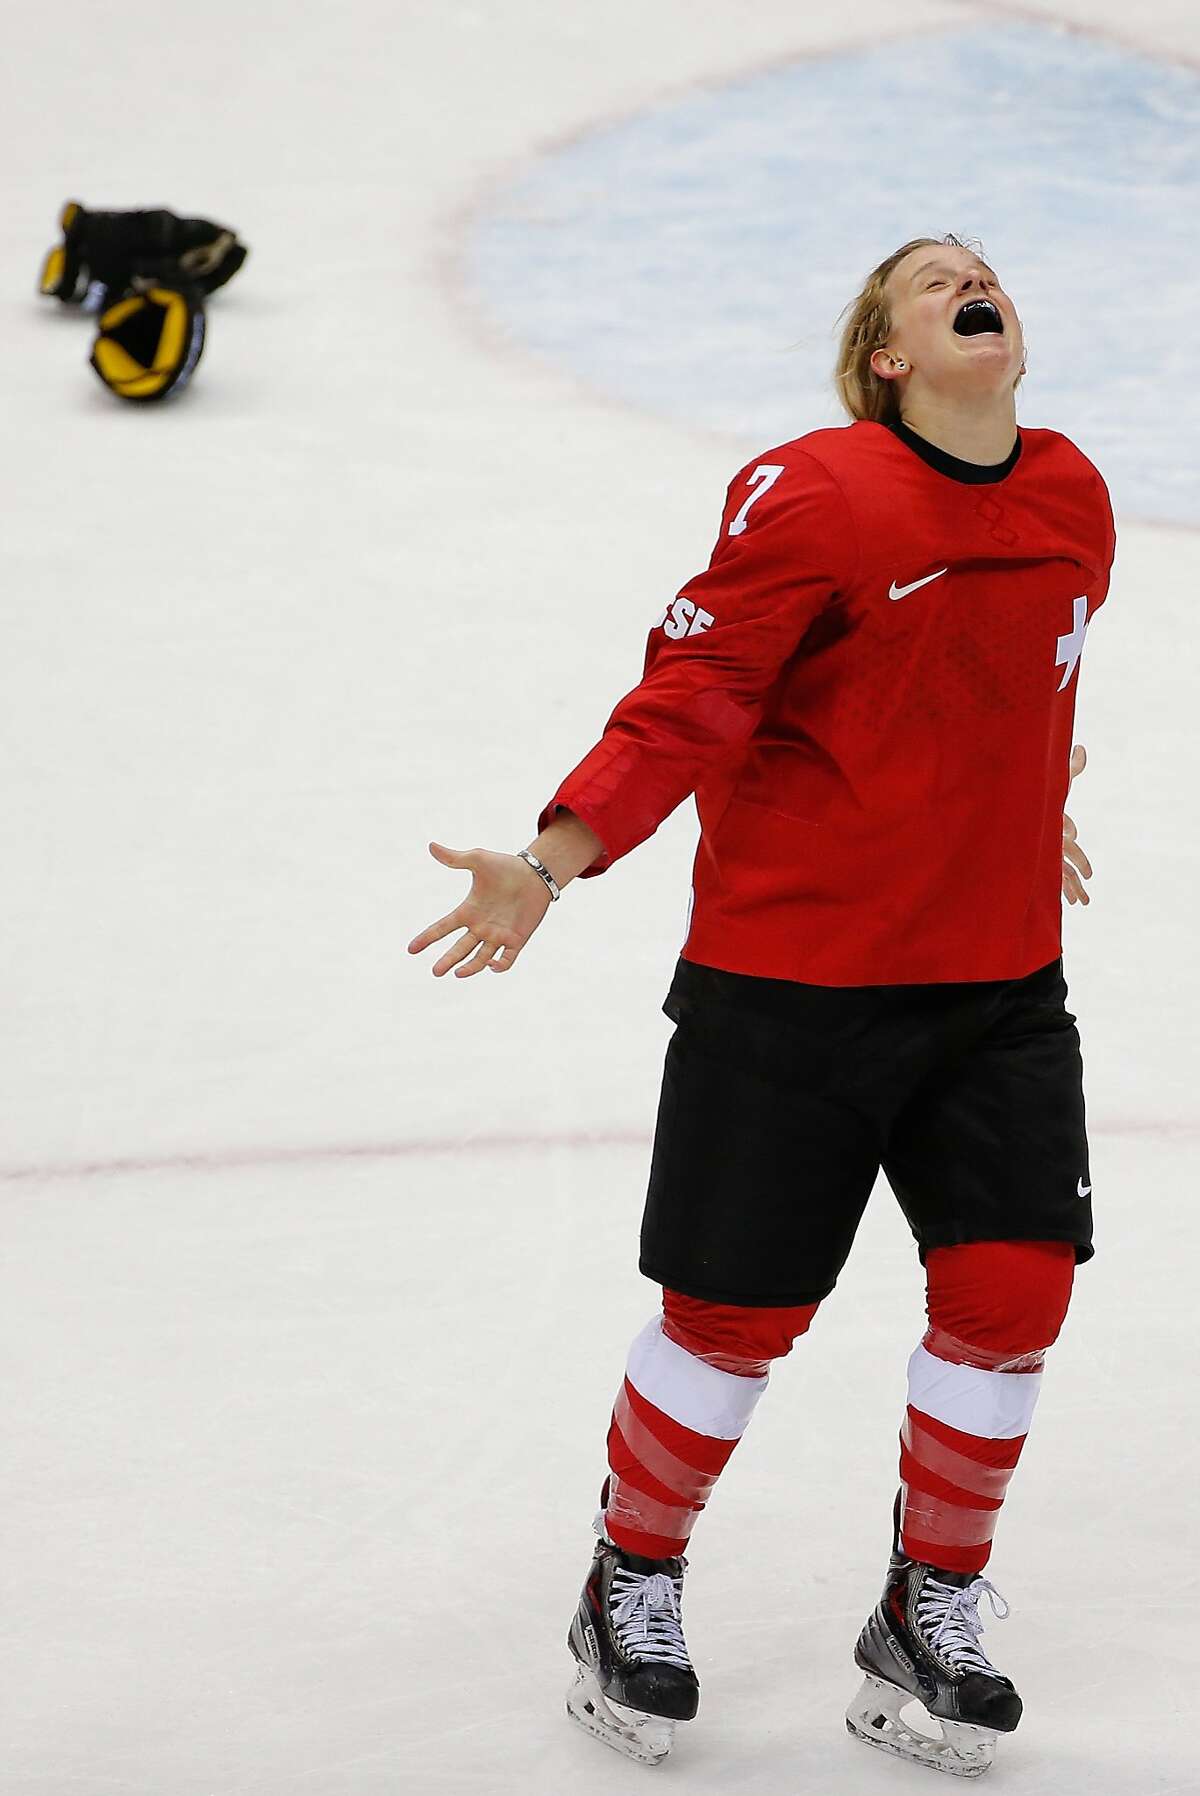 Lara Stalder of Switzerland (7) celebrates her team's 4-3 win over Sweden in the women's bronze medal ice hockey game at the 2014 Winter Olympics, Thursday, Feb. 20, 2014, in Sochi, Russia.